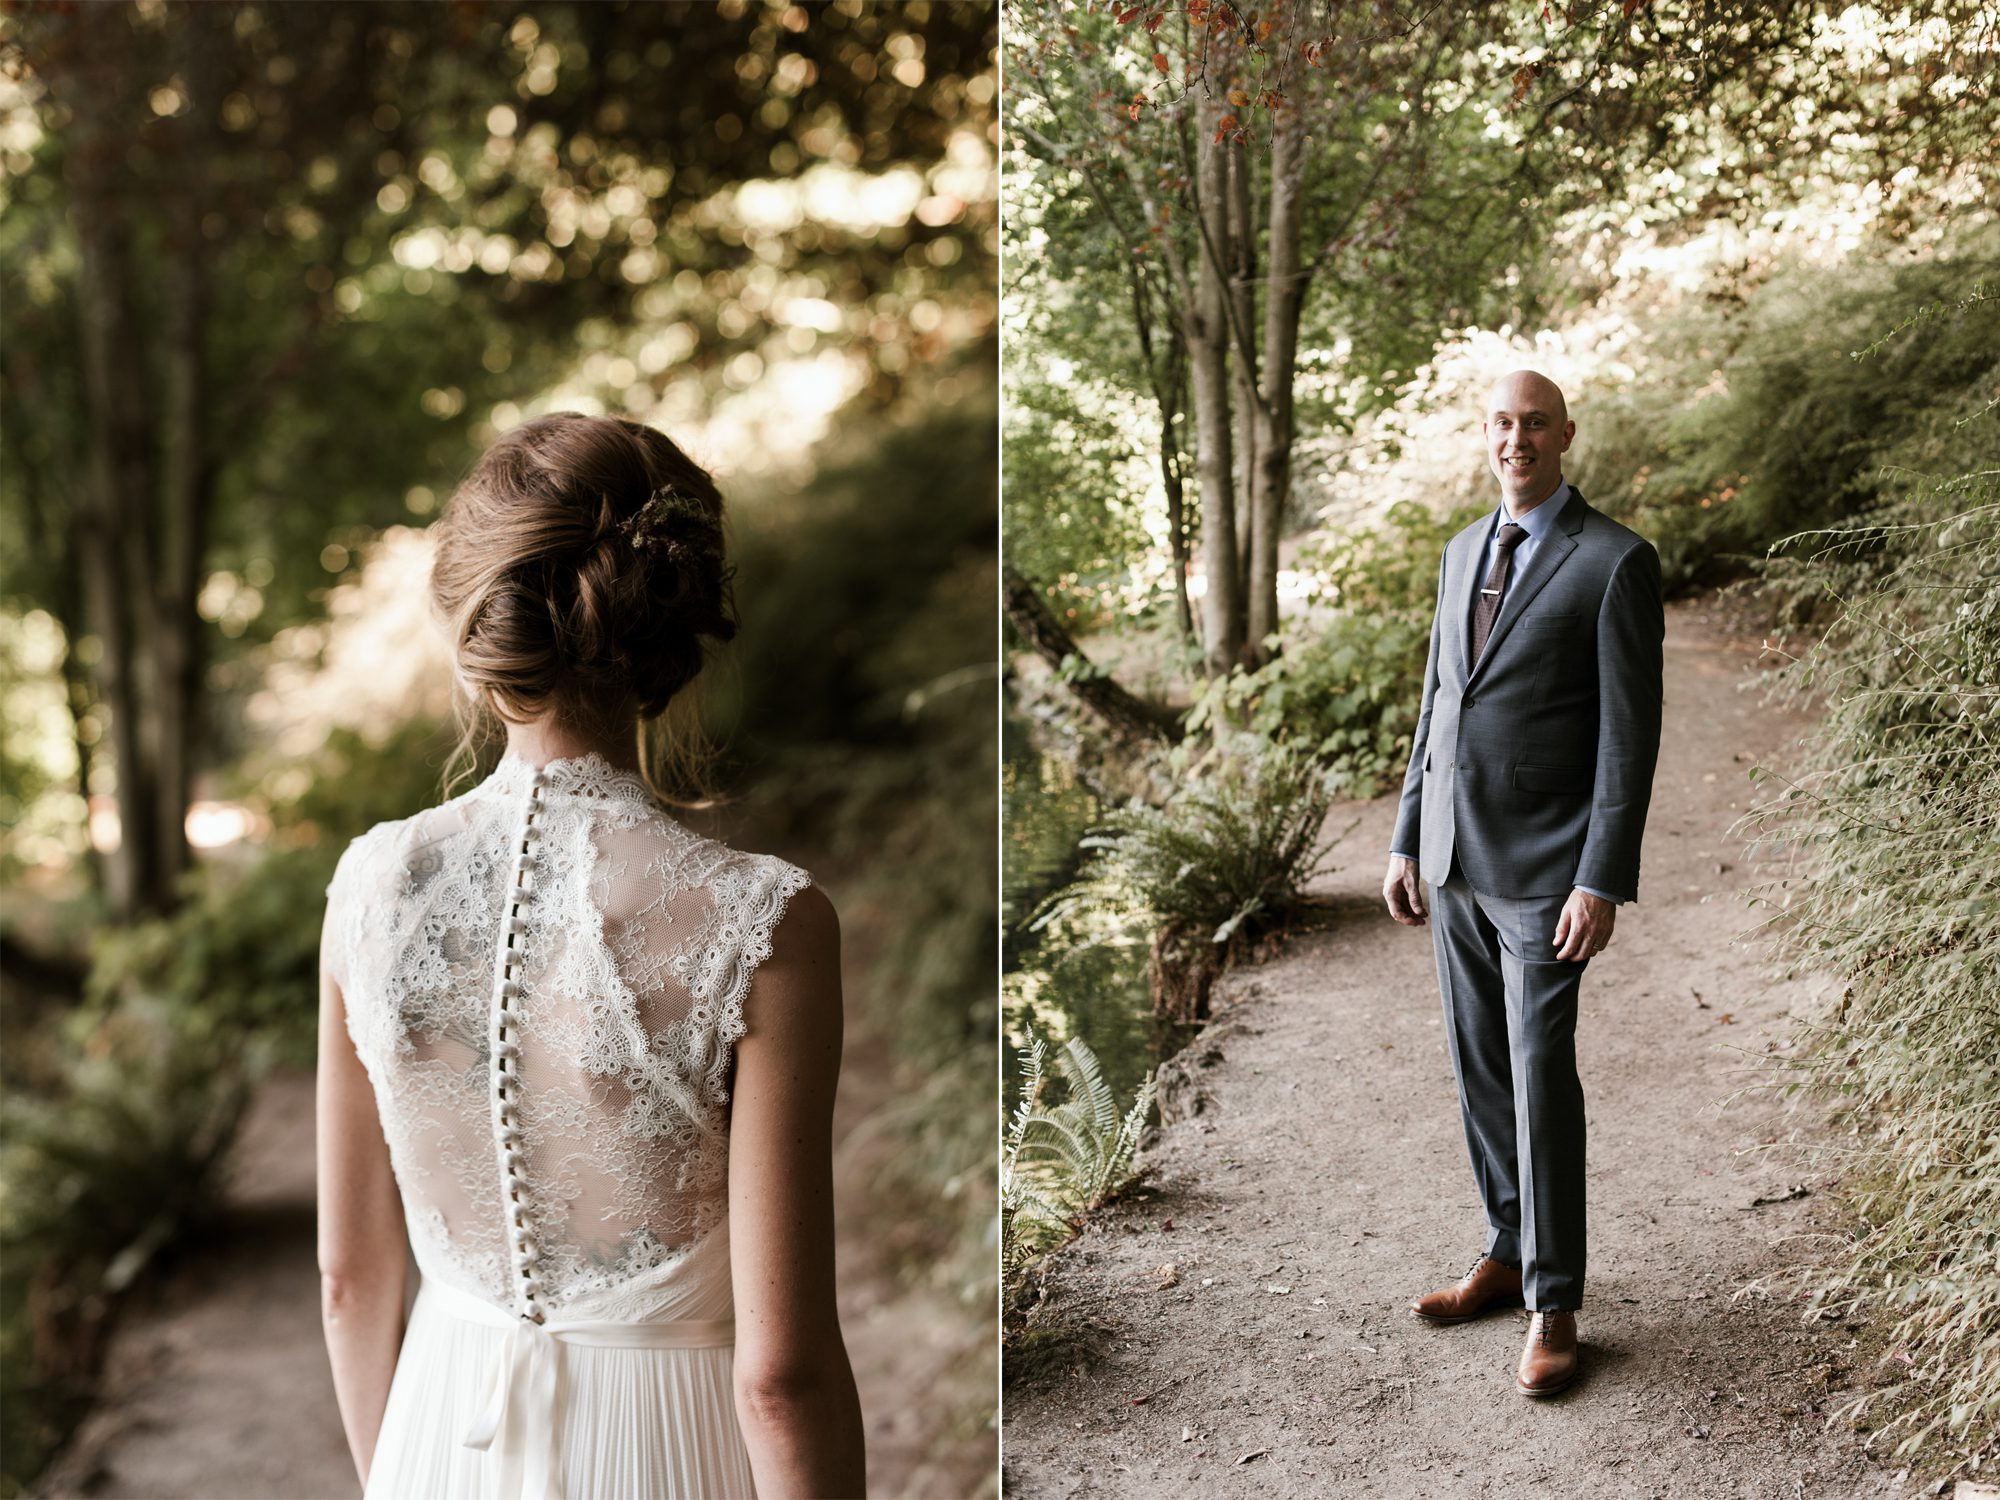 Portraits of the bride and groom after their wedding ceremony in Laurelhurst Park. By Laurelhurst Park wedding photographer Briana Morrison